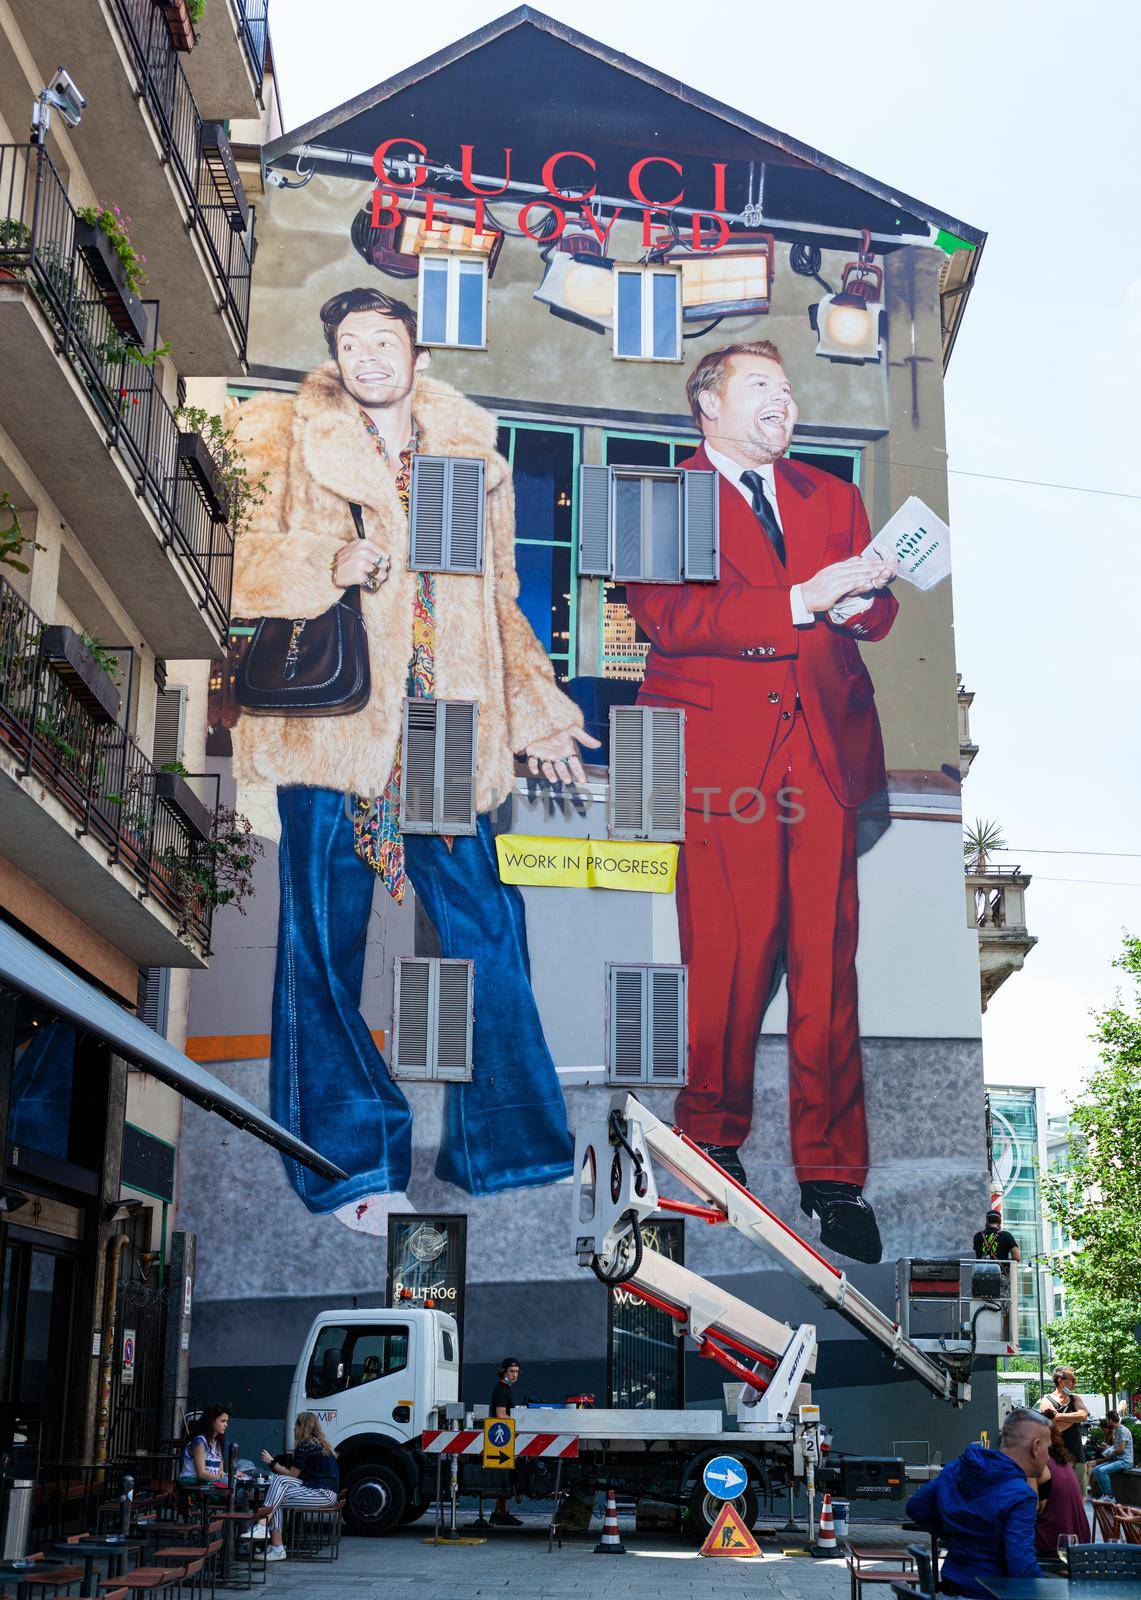 The murales of Harry and James at Gucci Wall of Milan by bepsimage